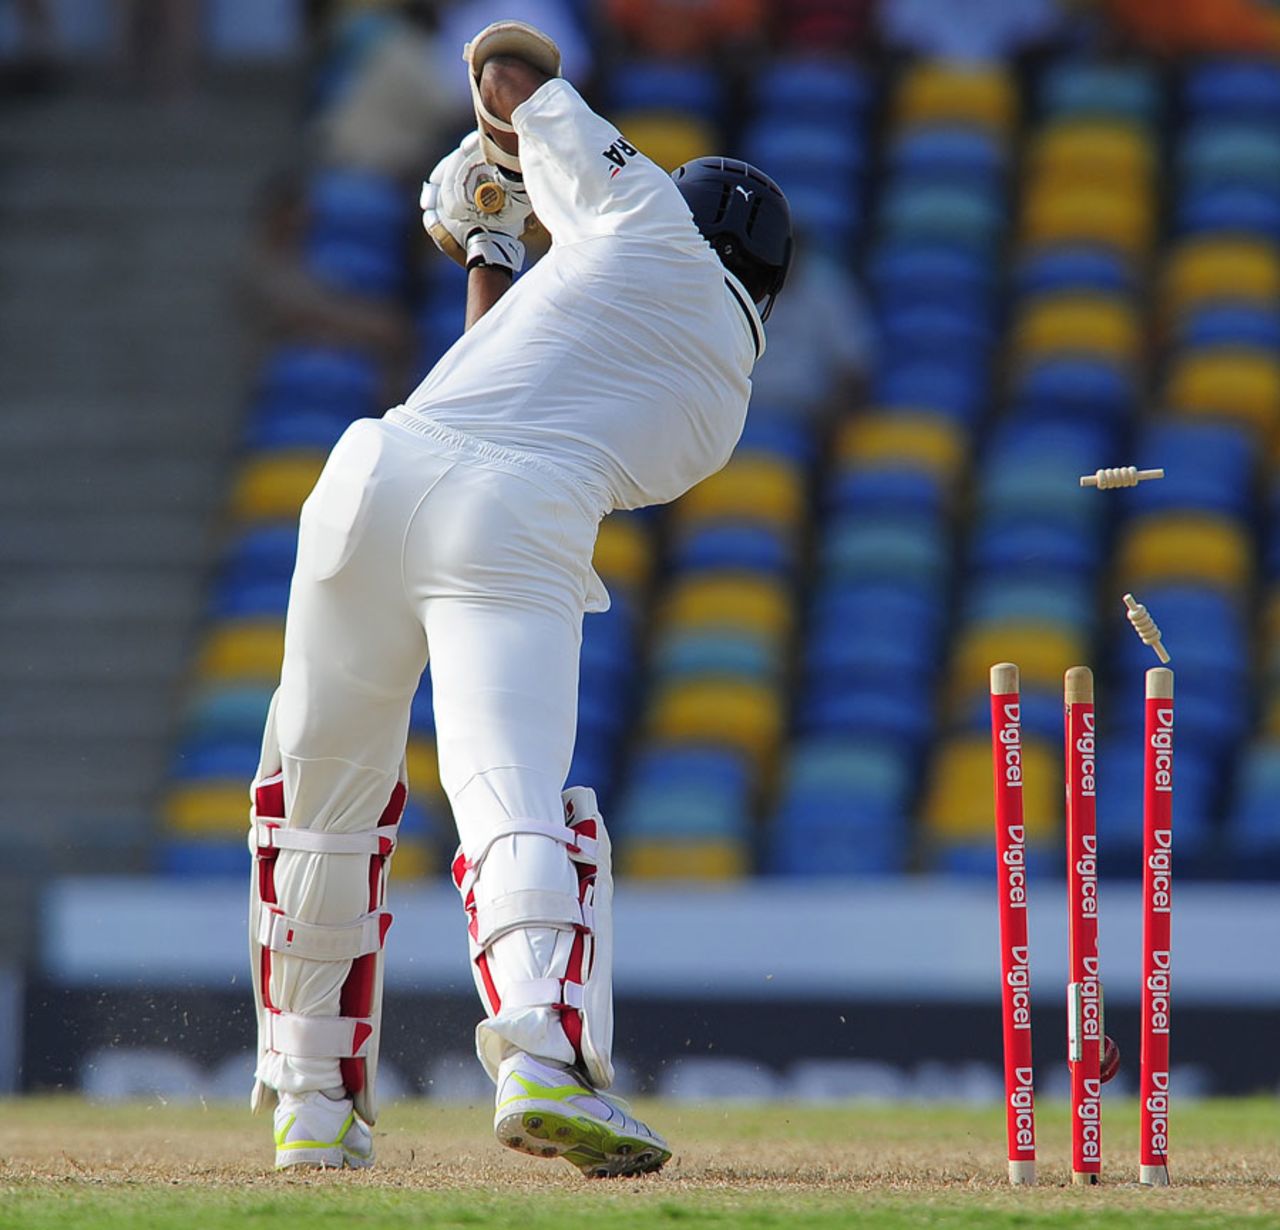 Abhimanyu Mithun is bowled by Fidel Edwards, West Indies v India, 2nd Test, Bridgetown, 1st day, June 28, 2011 